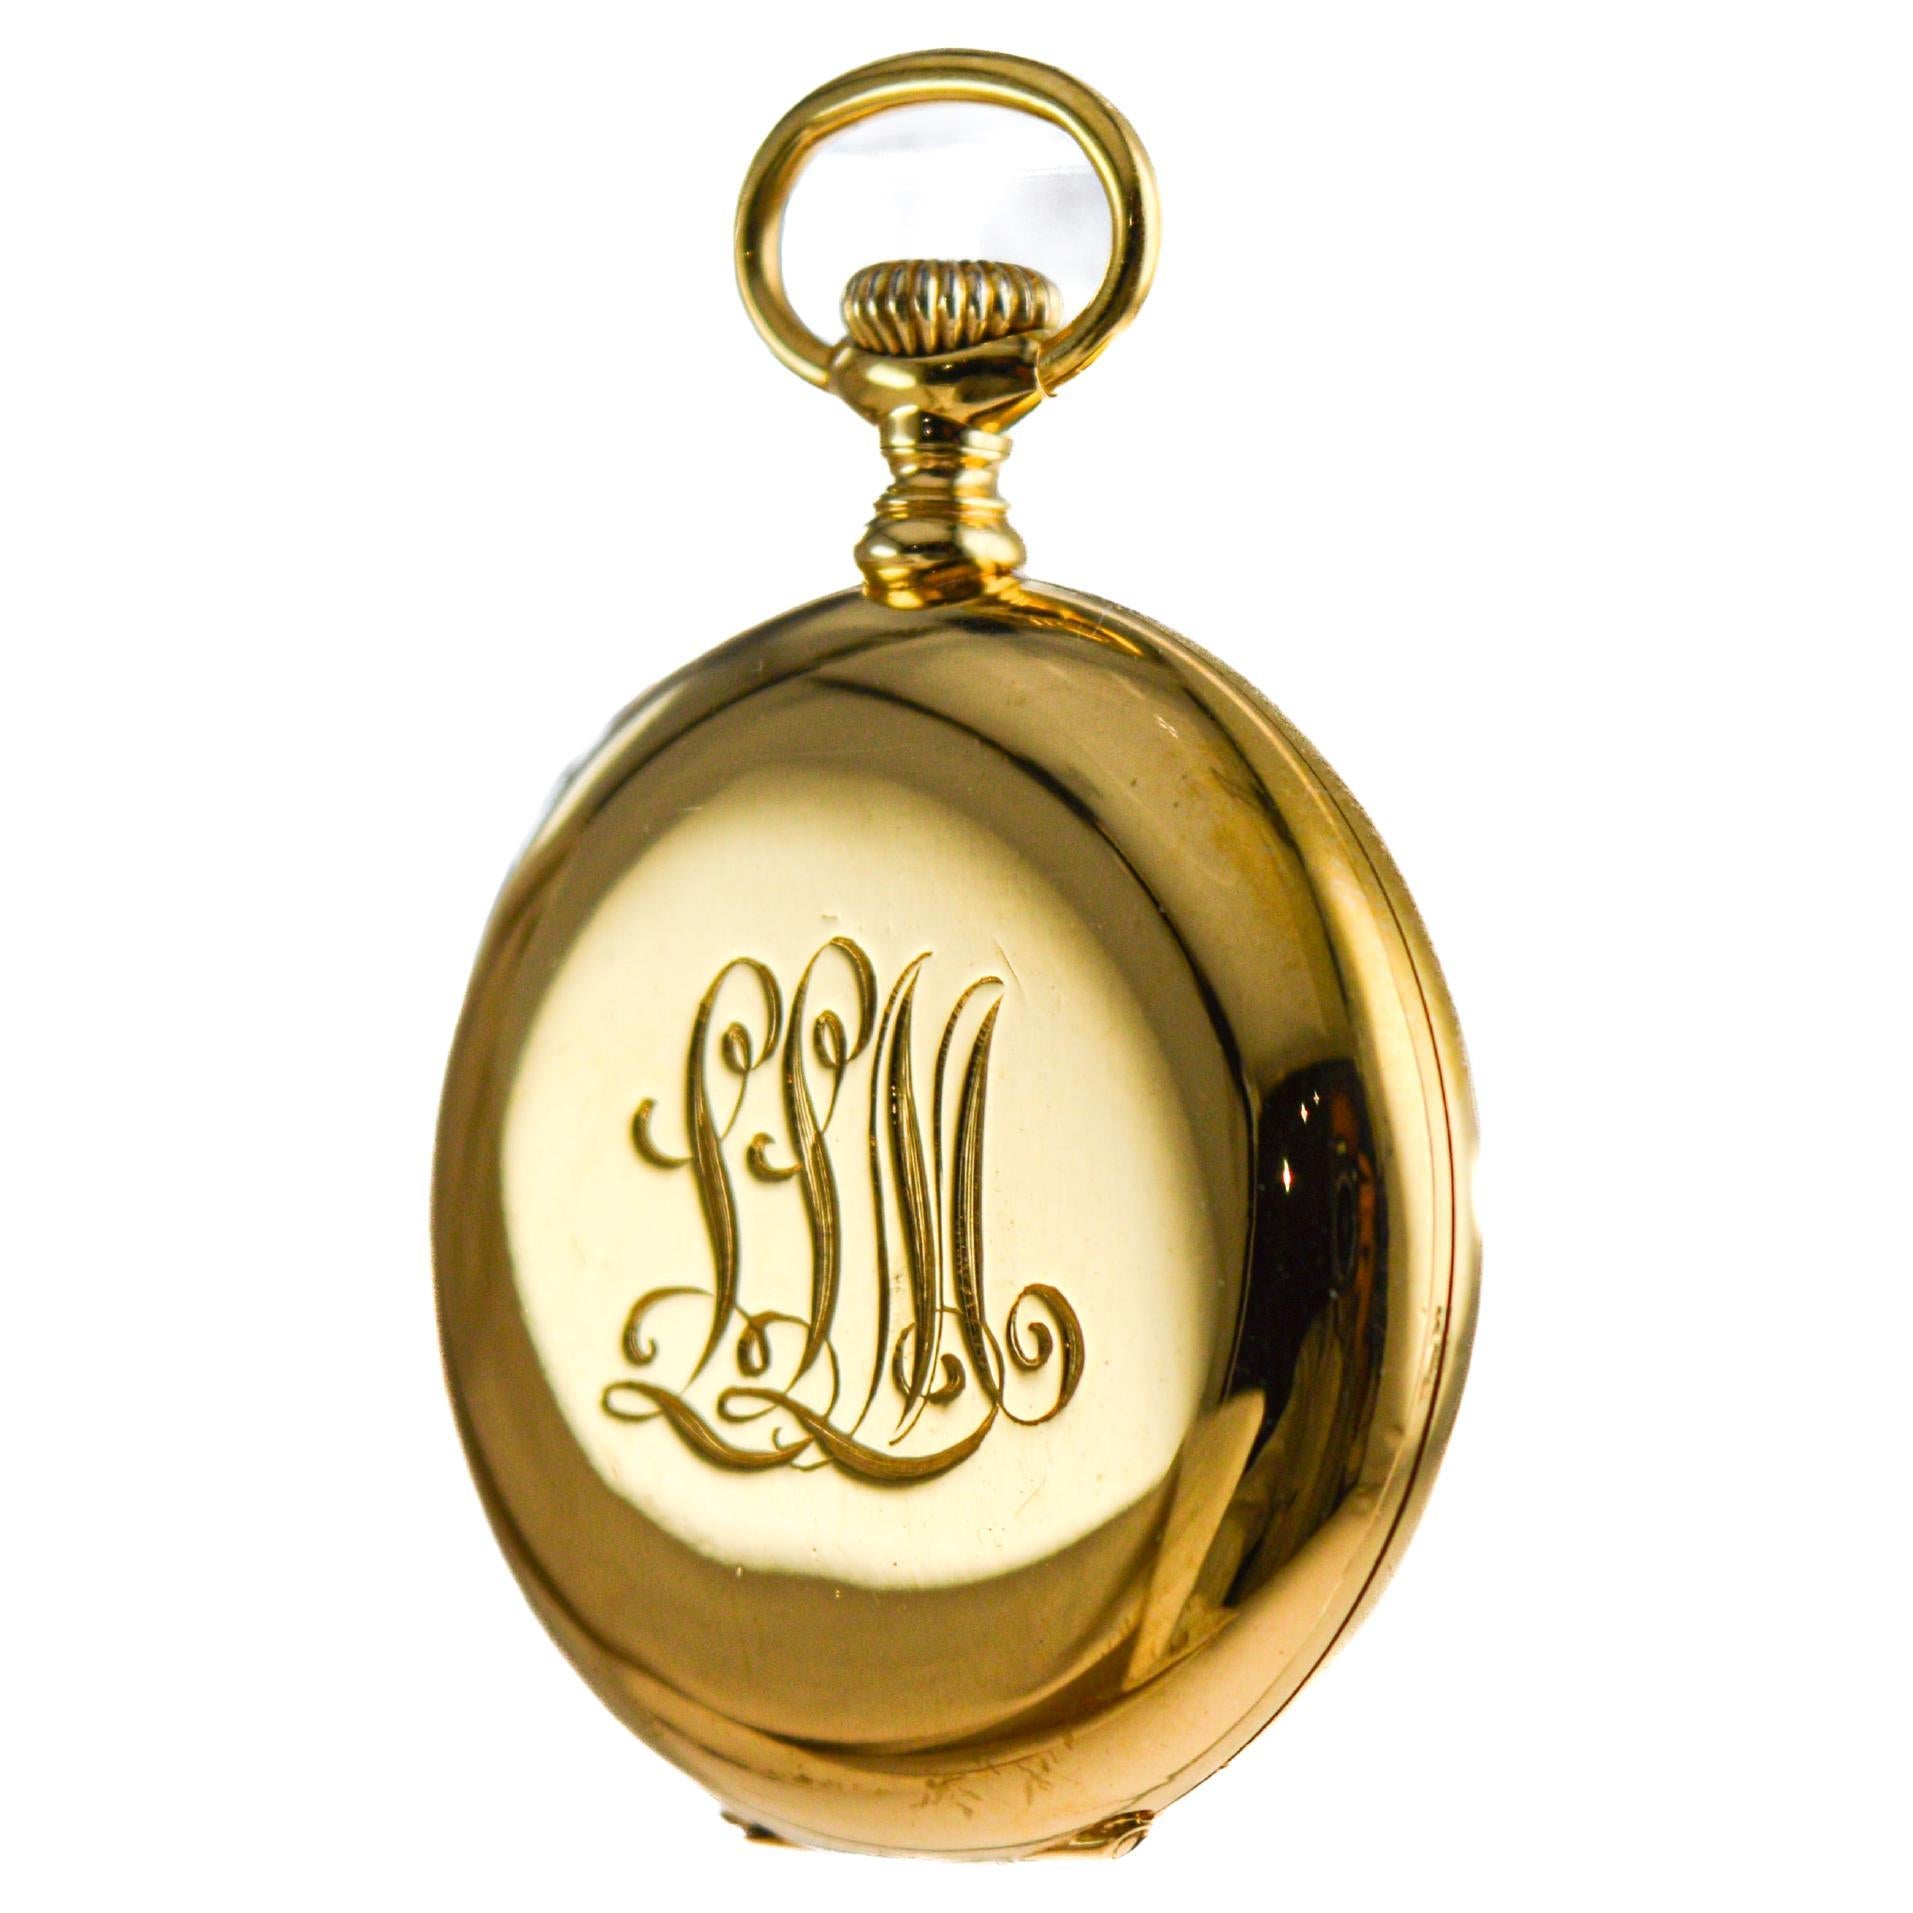 Tiffany & Co 18Kt Gold Pendant Watch with Gold Chain from 1912 Enamel Dial For Sale 7